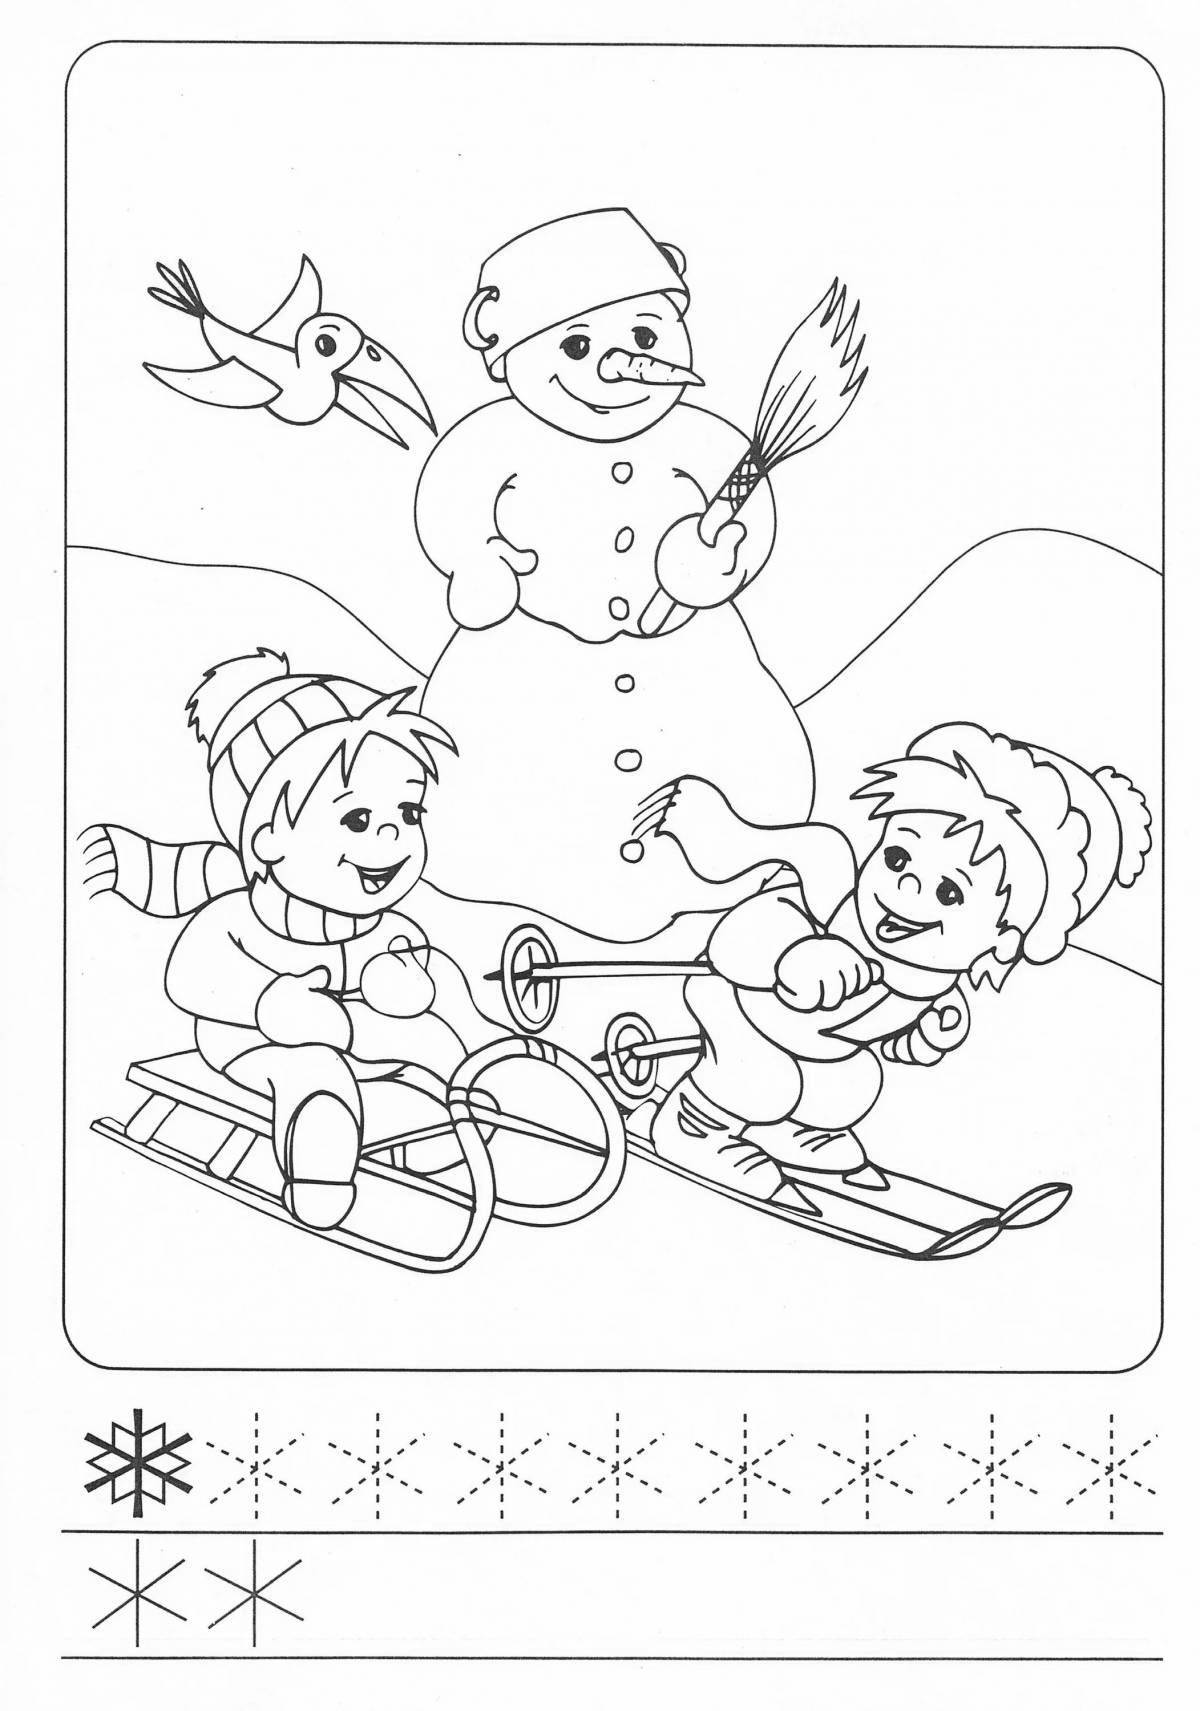 Amazing coloring pages signs of winter for kids